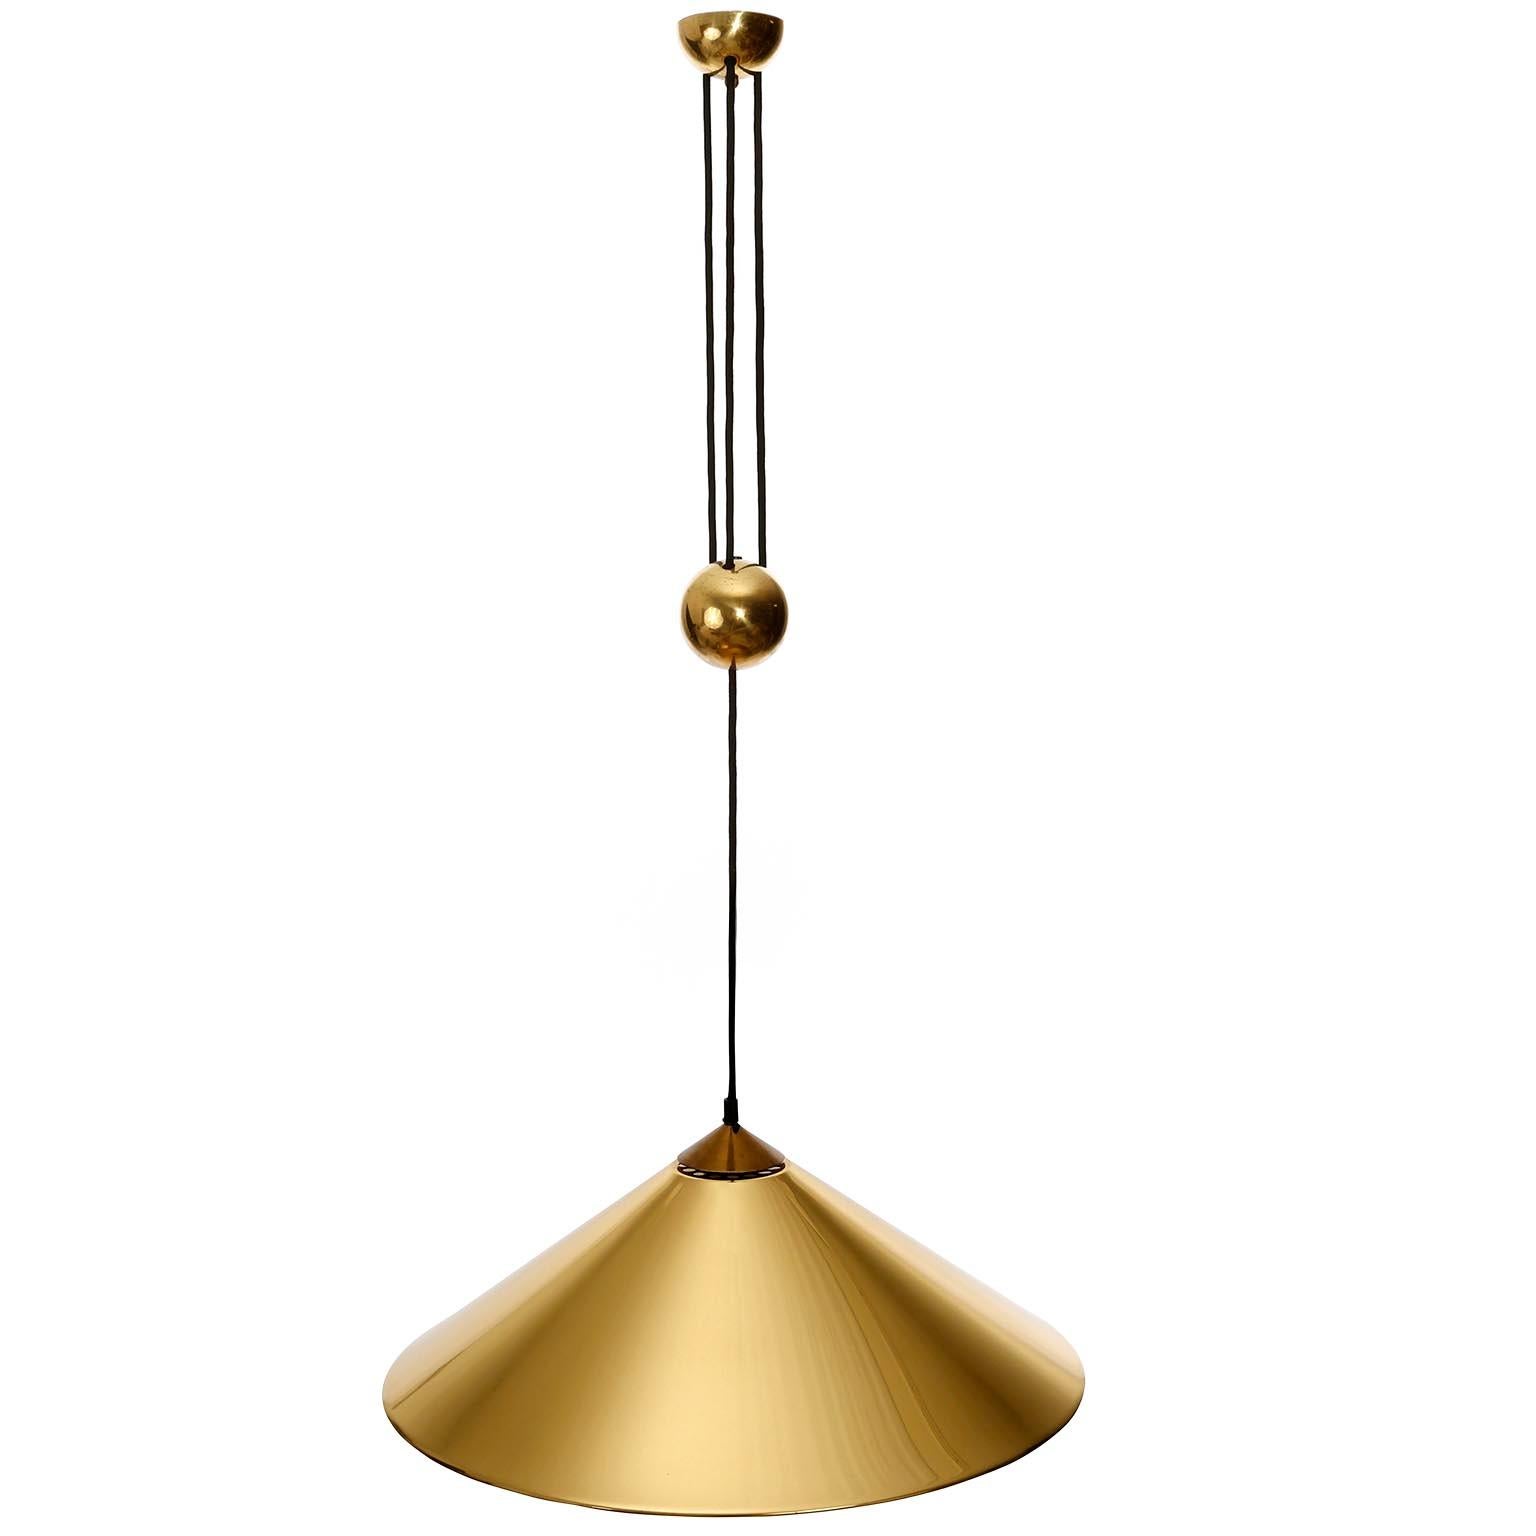 A height adjustable pendant lamp model 'Keos' by Florian Schulz, Germany, manufactured in midcentury, circa 1970 (late 1960s-early 1970s).
The fixture is made of solid brass with a polished and aged surface in a rich and warm tone with patina and